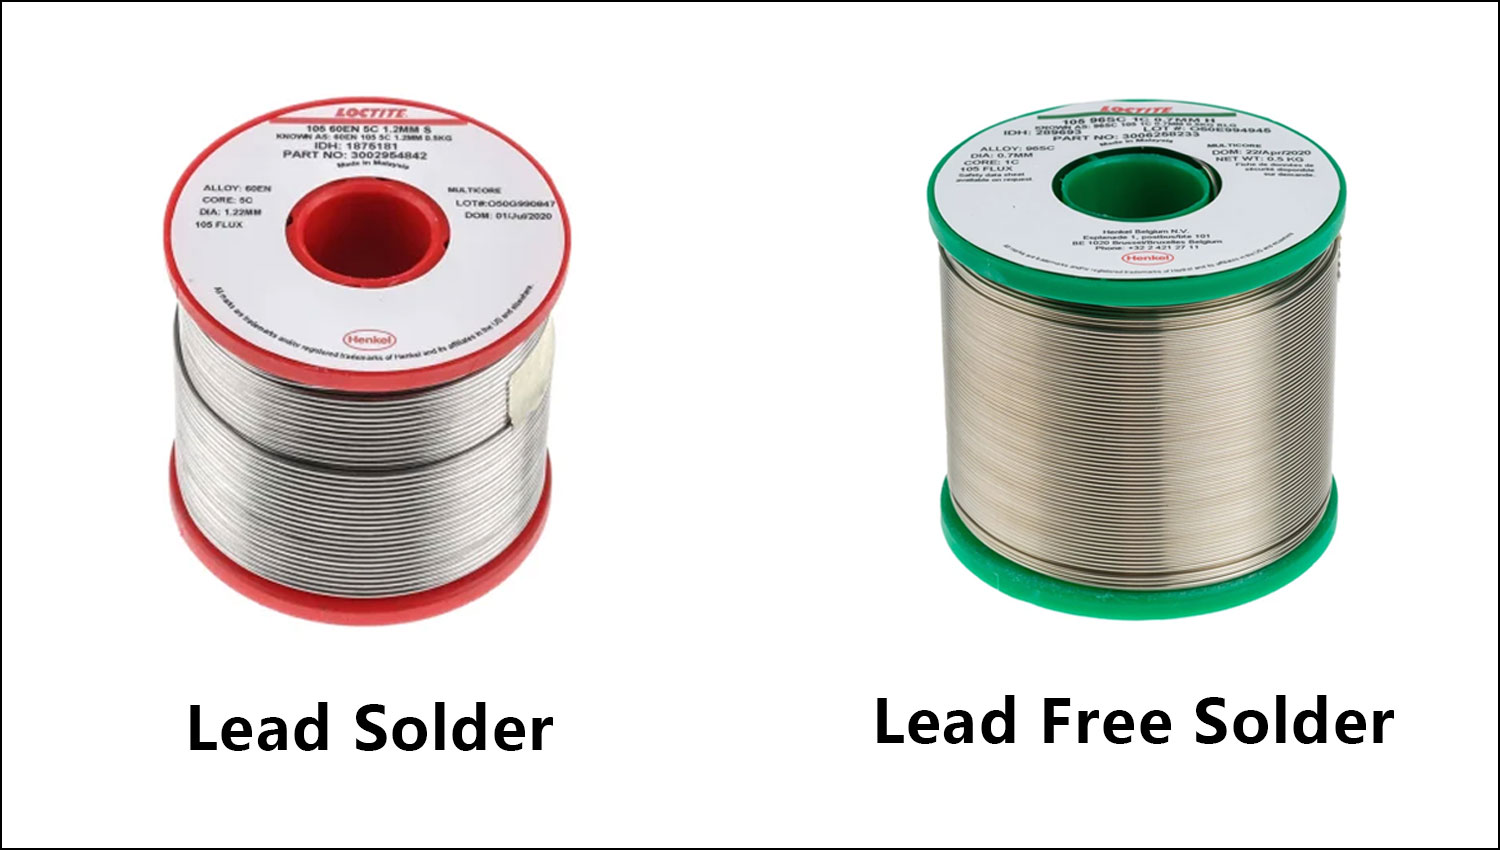 Solder Alloys Test - Lead and Lead Free Solder 